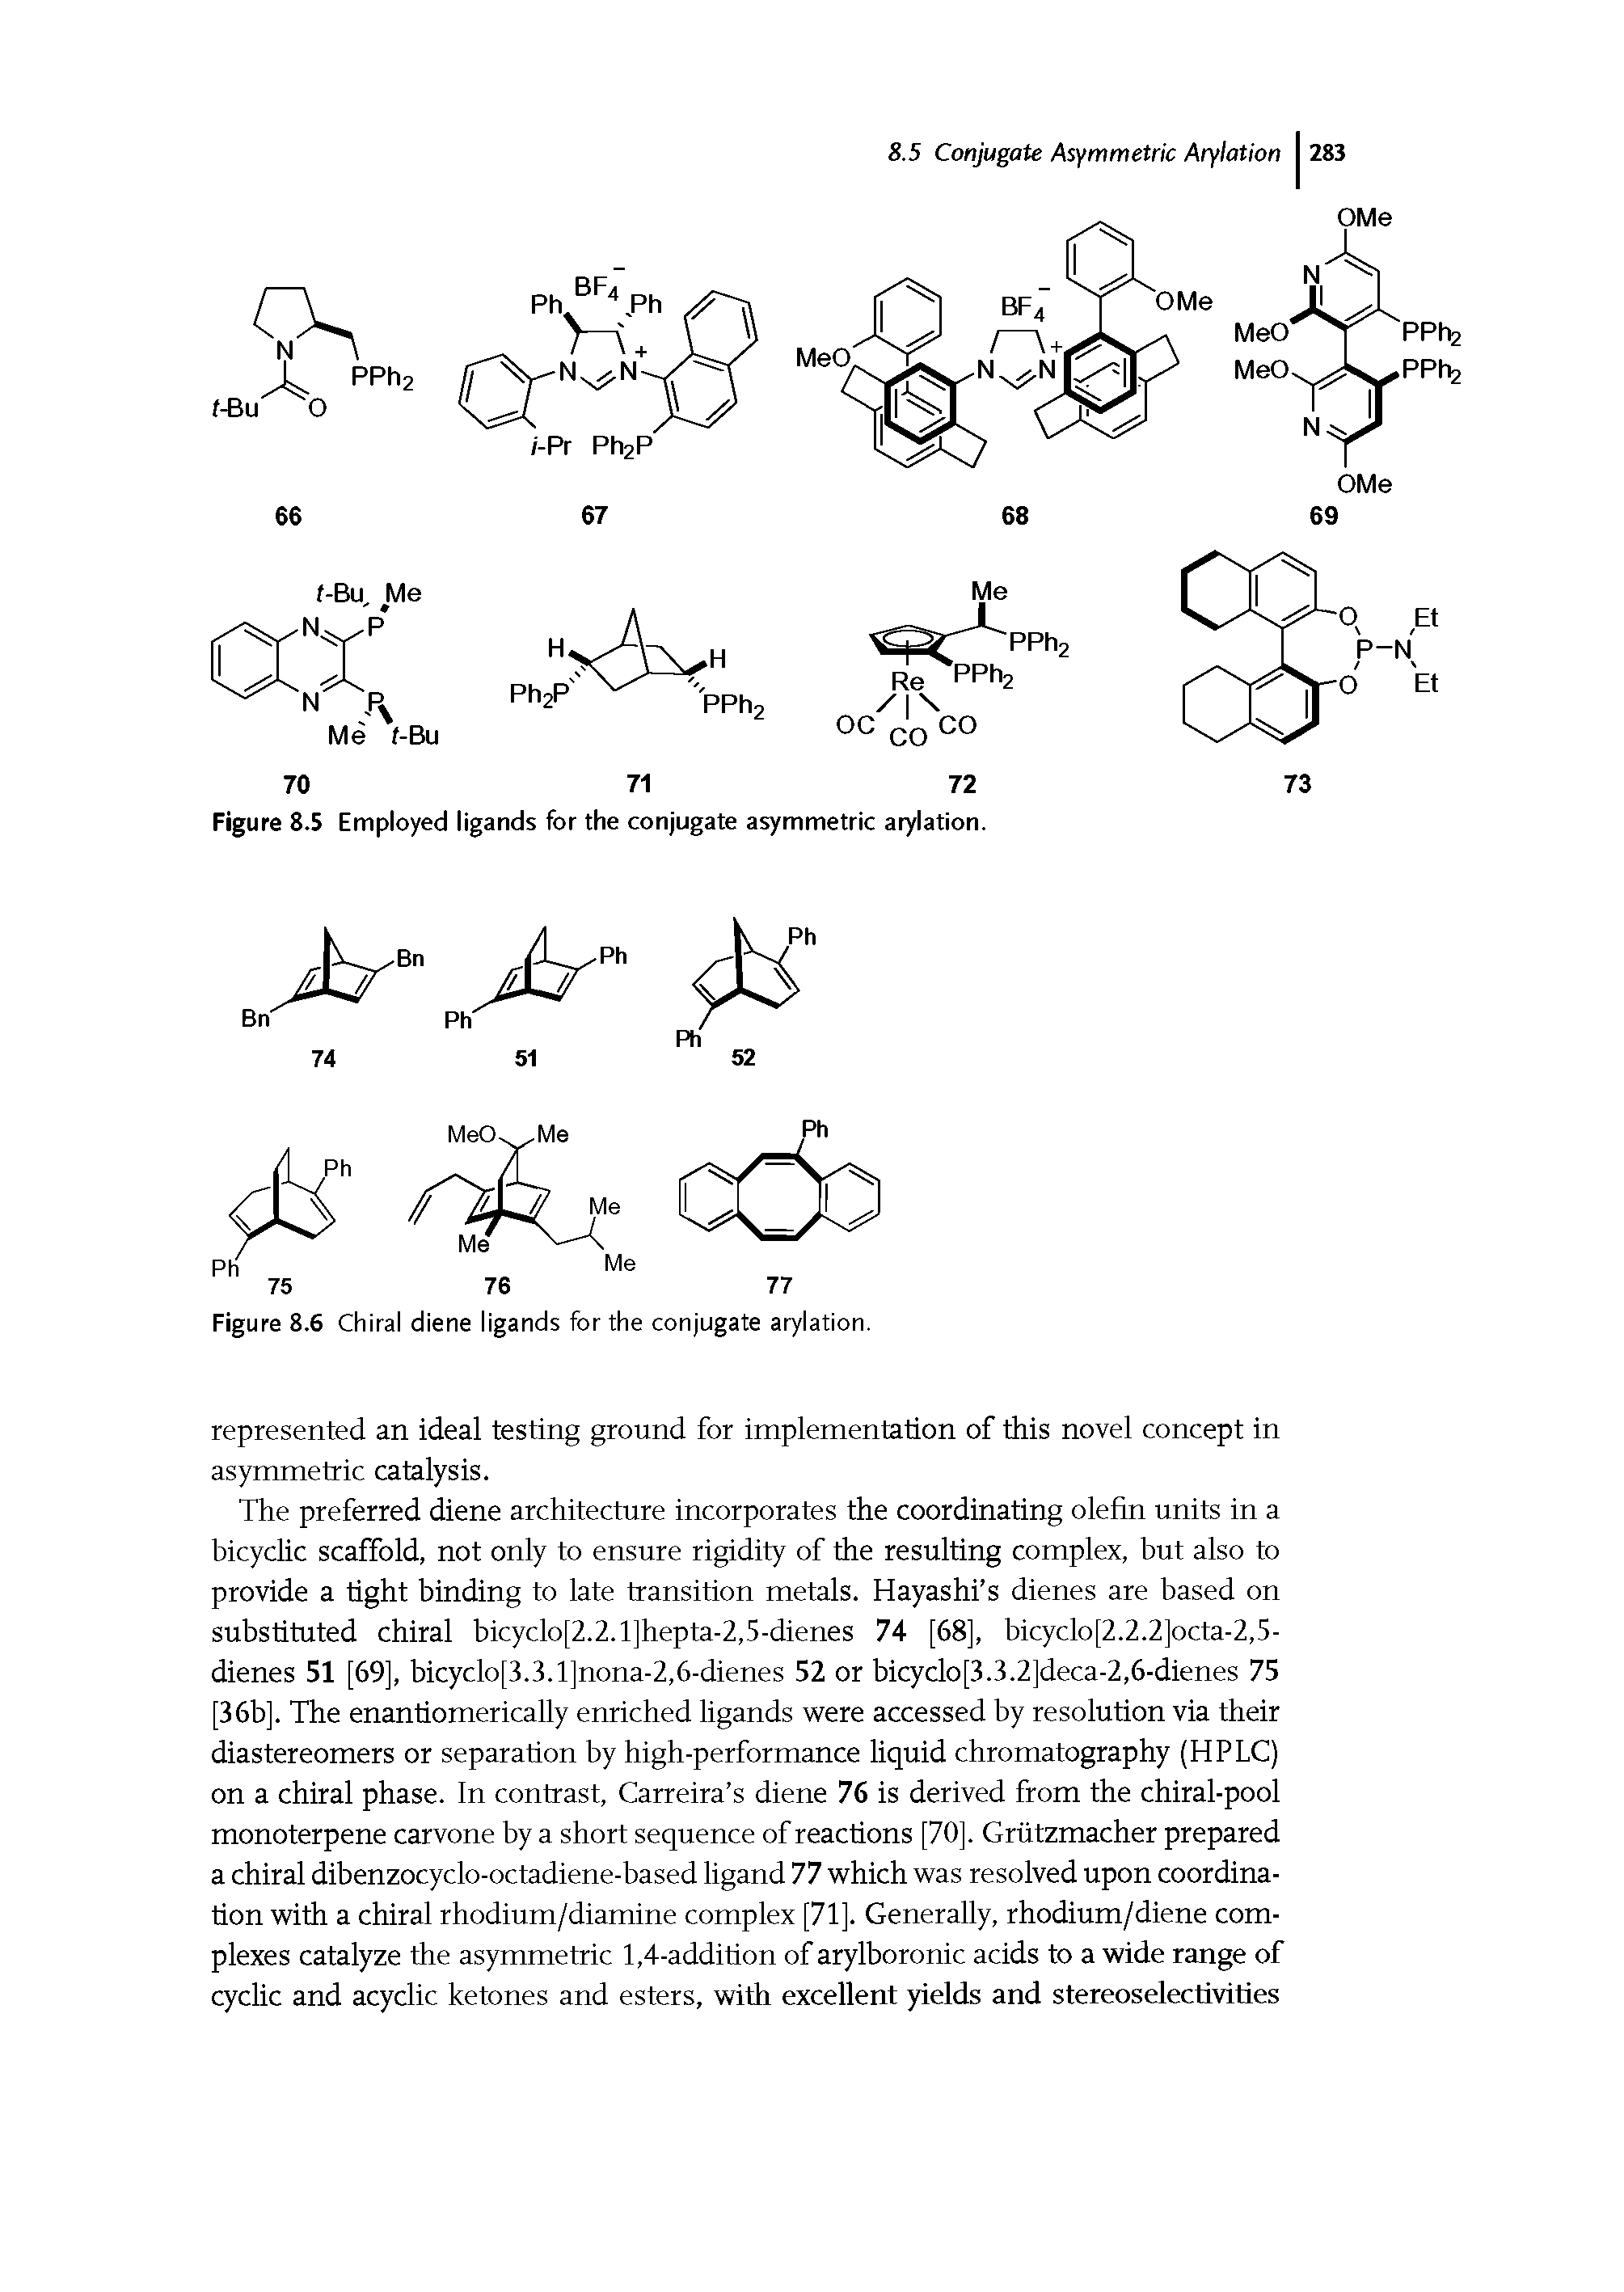 Figure 8.5 Employed ligands for the conjugate asymmetric arylation.